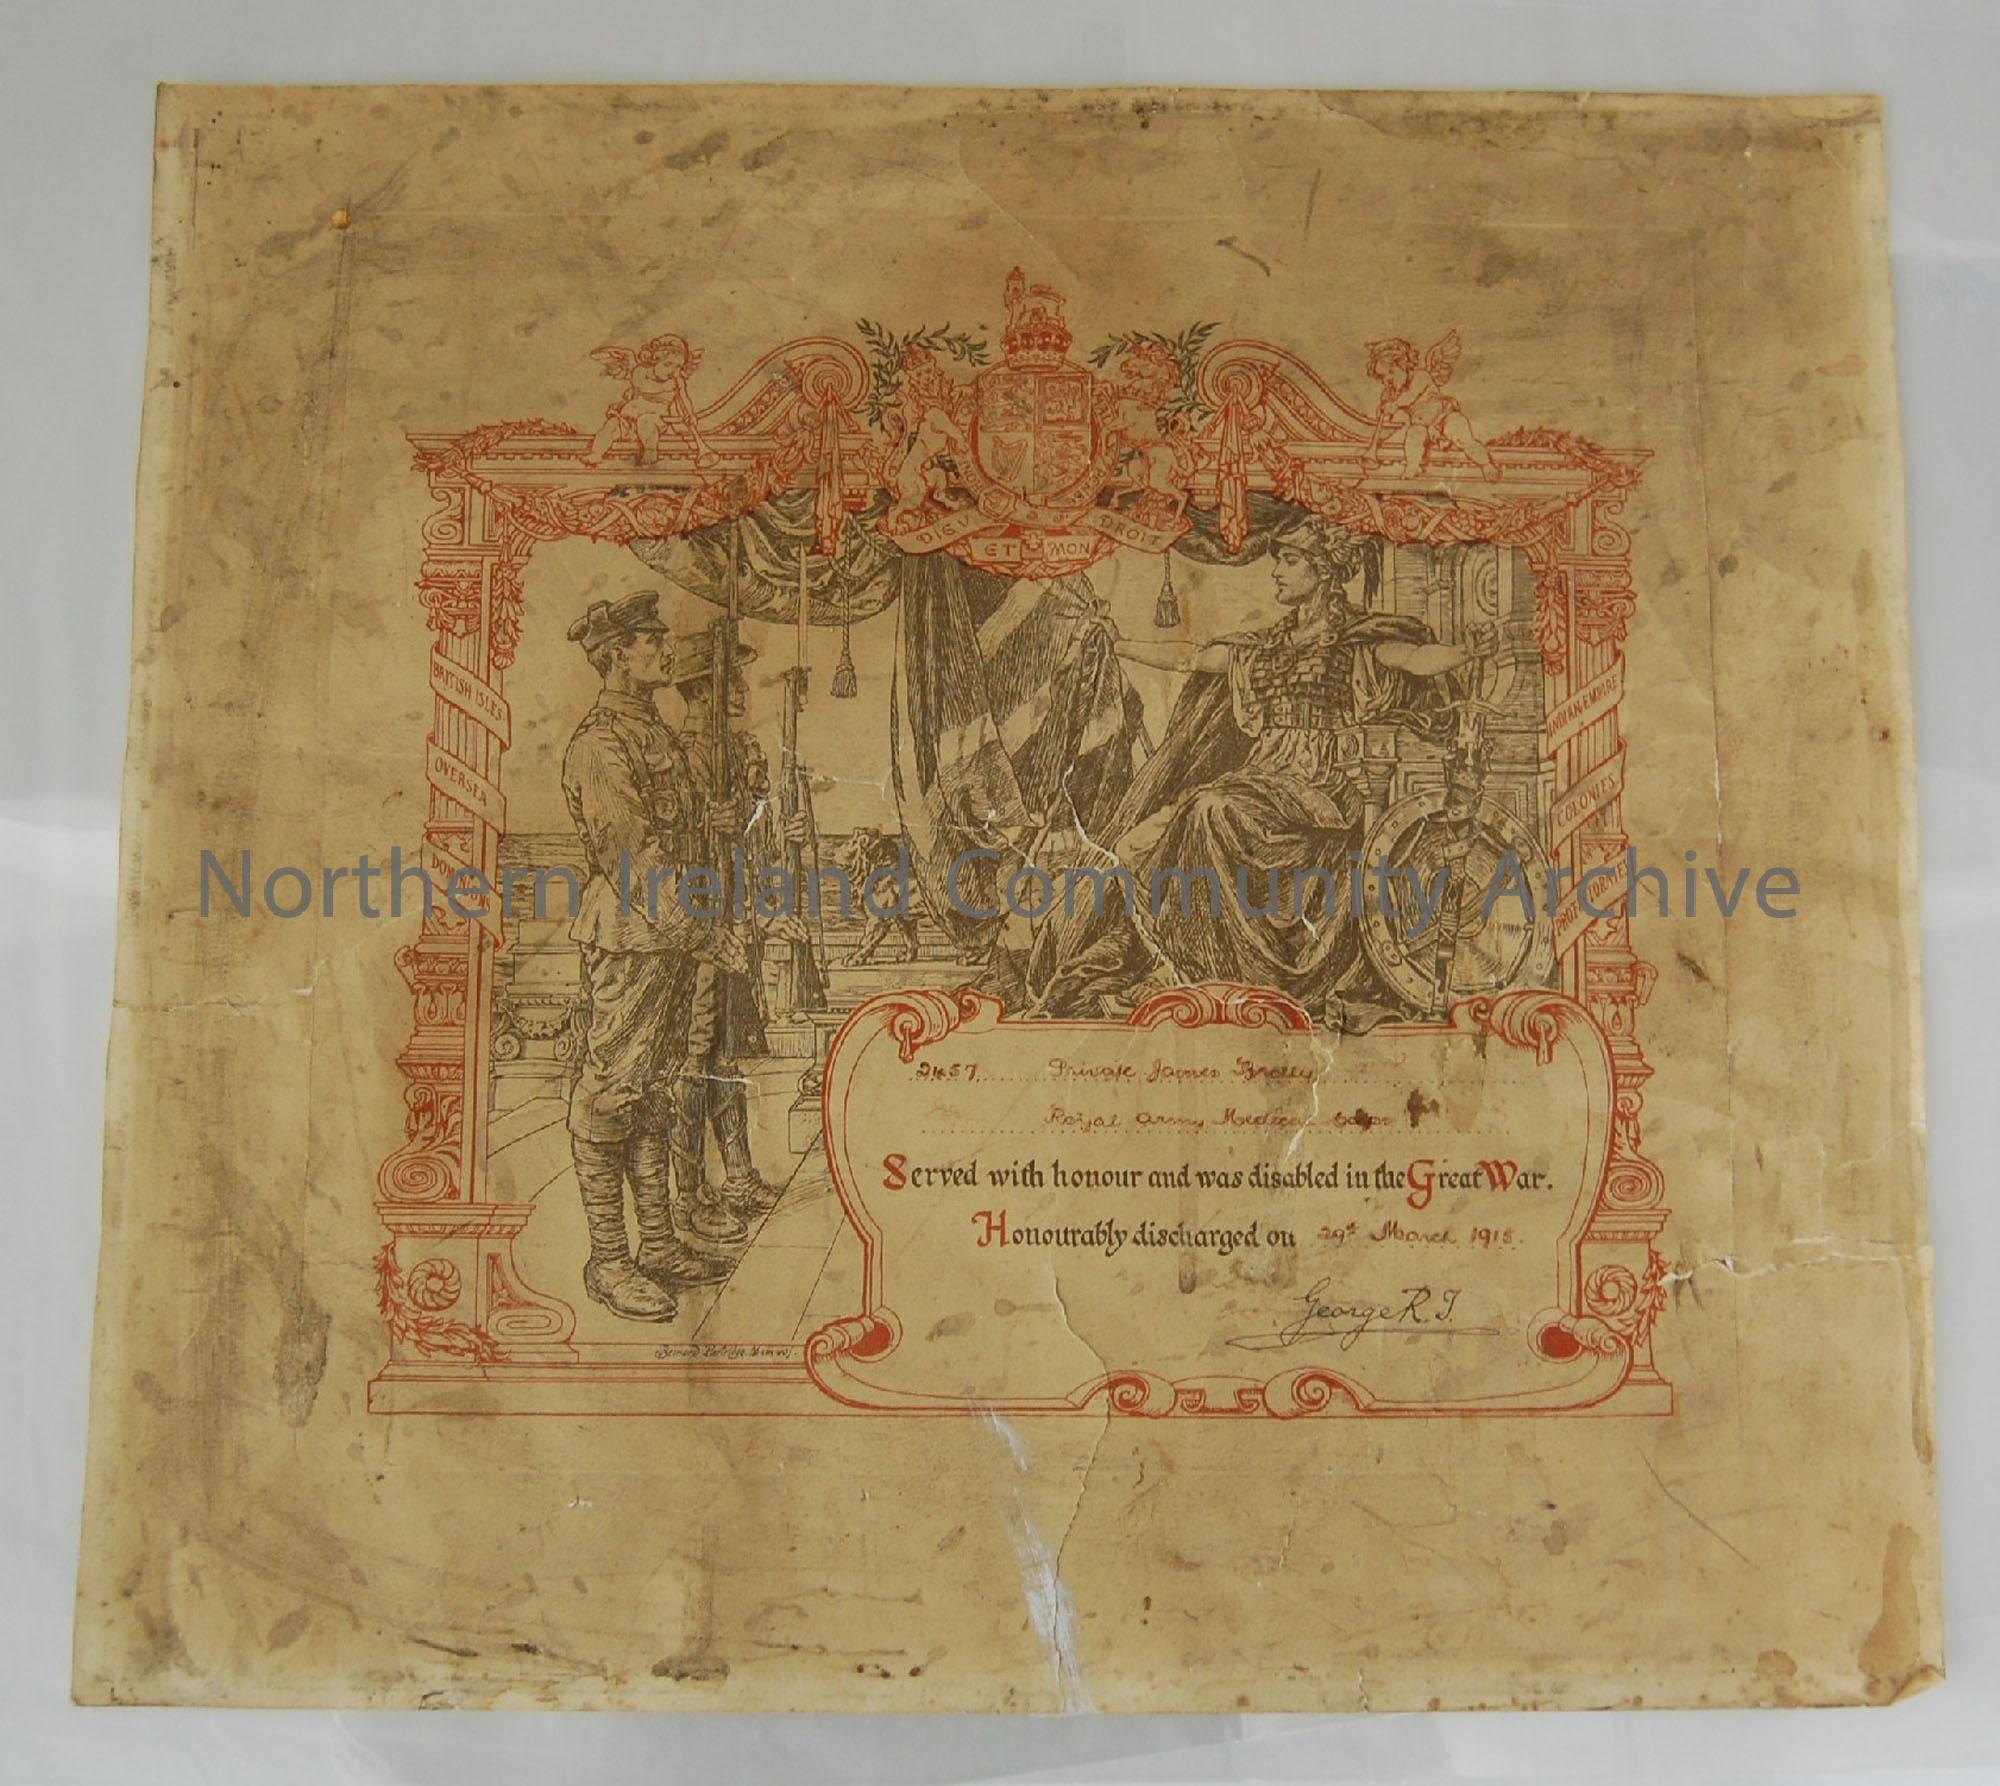 Certificate for Honourable Discharge, 29 March 1915, Pte. James Brolly, Royal Army Medical Corp. The image on the certificate portrays Britannia salut…